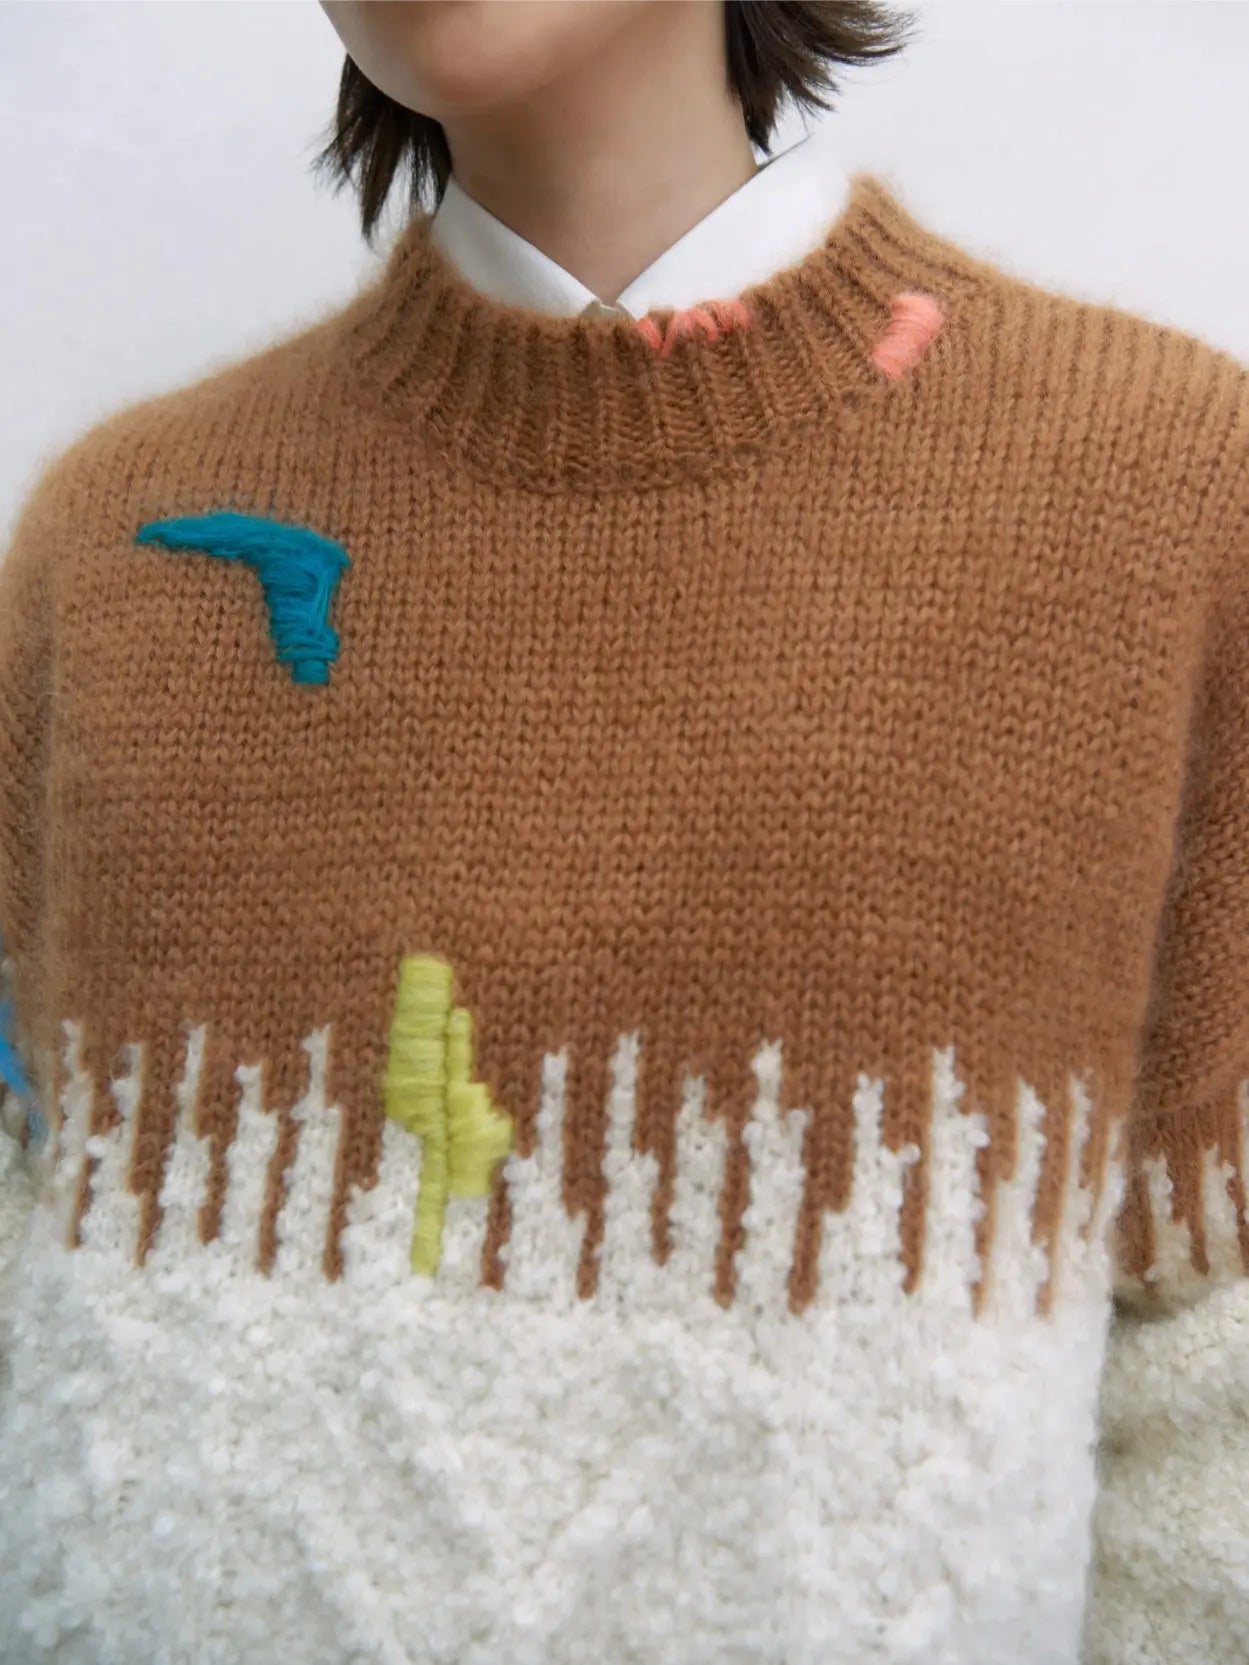 A person with short hair is wearing a cozy Cordera Mohair Embroidered Sweater with a brown top portion, white lower portion featuring a textured pattern, and colorful abstract designs. They are standing against a plain background, looking directly at the camera, perhaps right outside bassalstore in Barcelona.